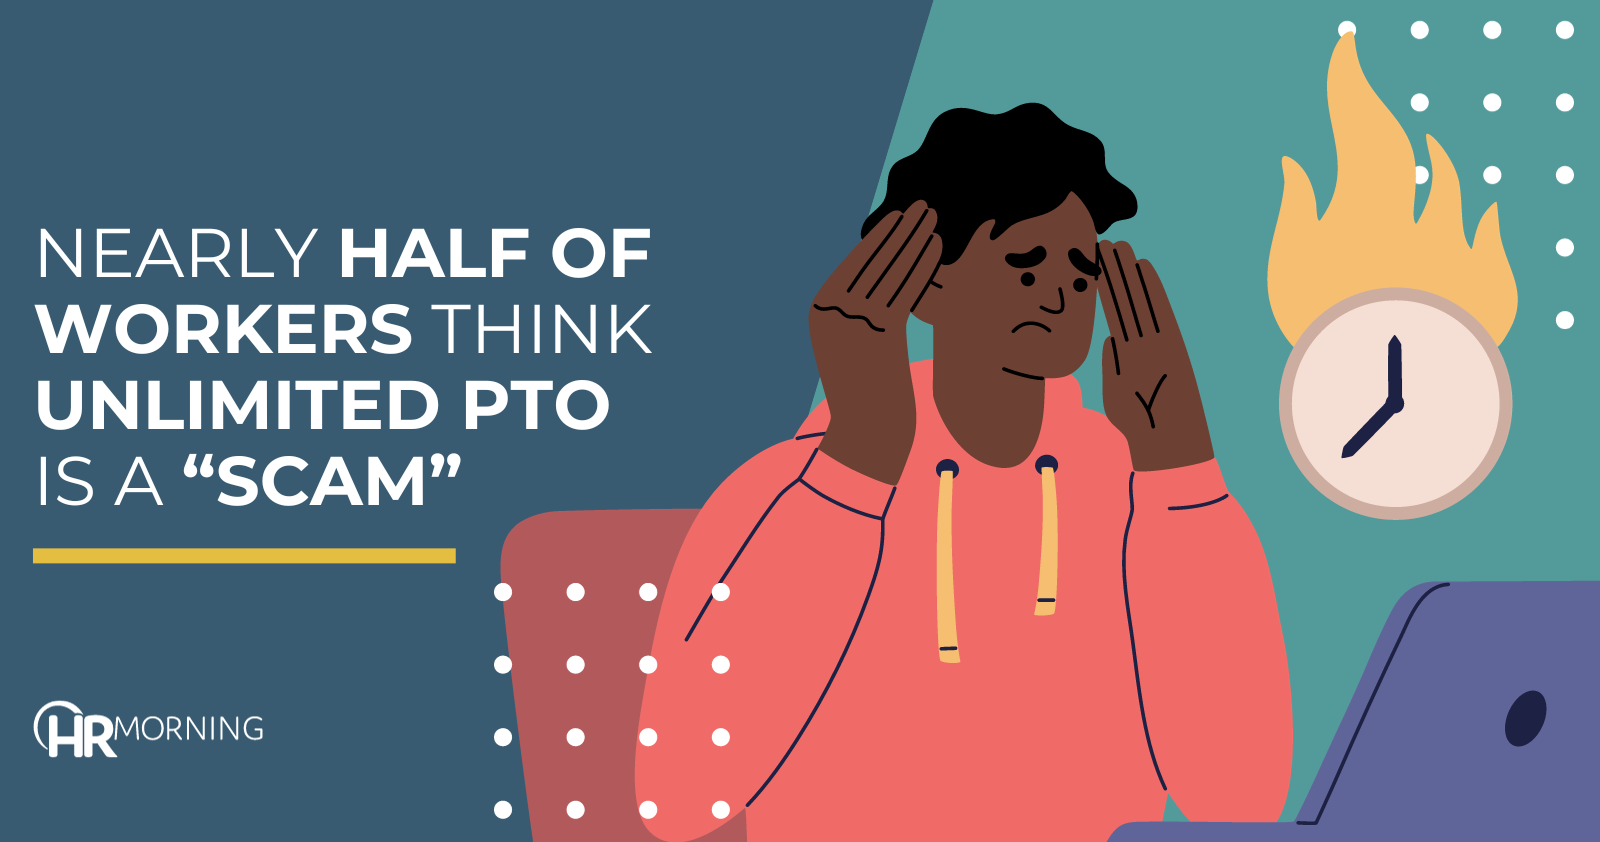 Nearly half of workers think unlimited PTO is a “scam”